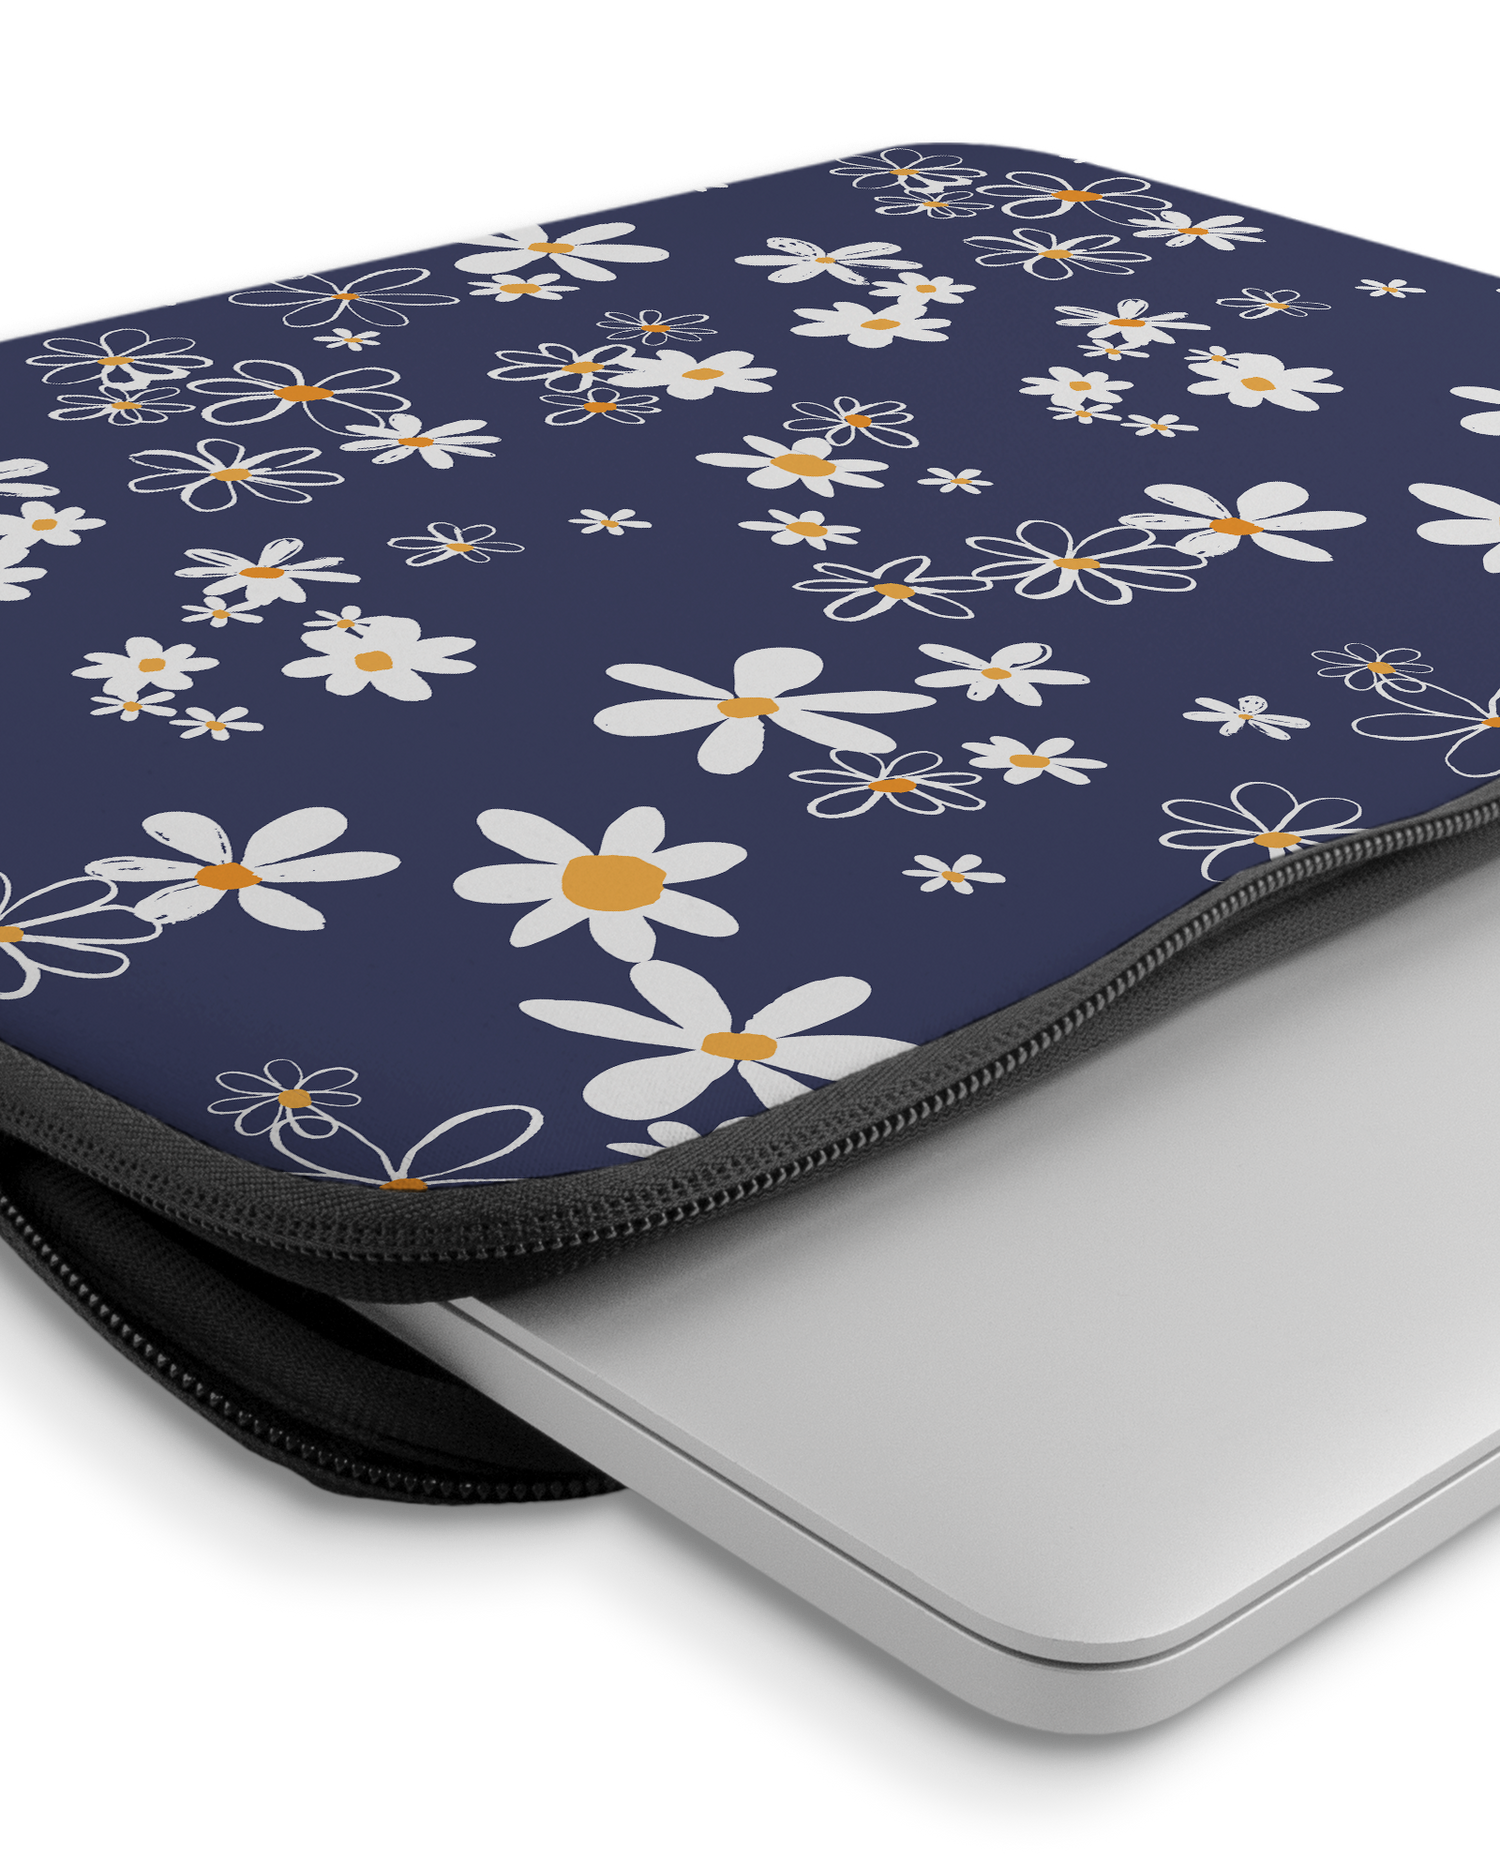 Navy Daisies Laptop Case 14-15 inch with device inside